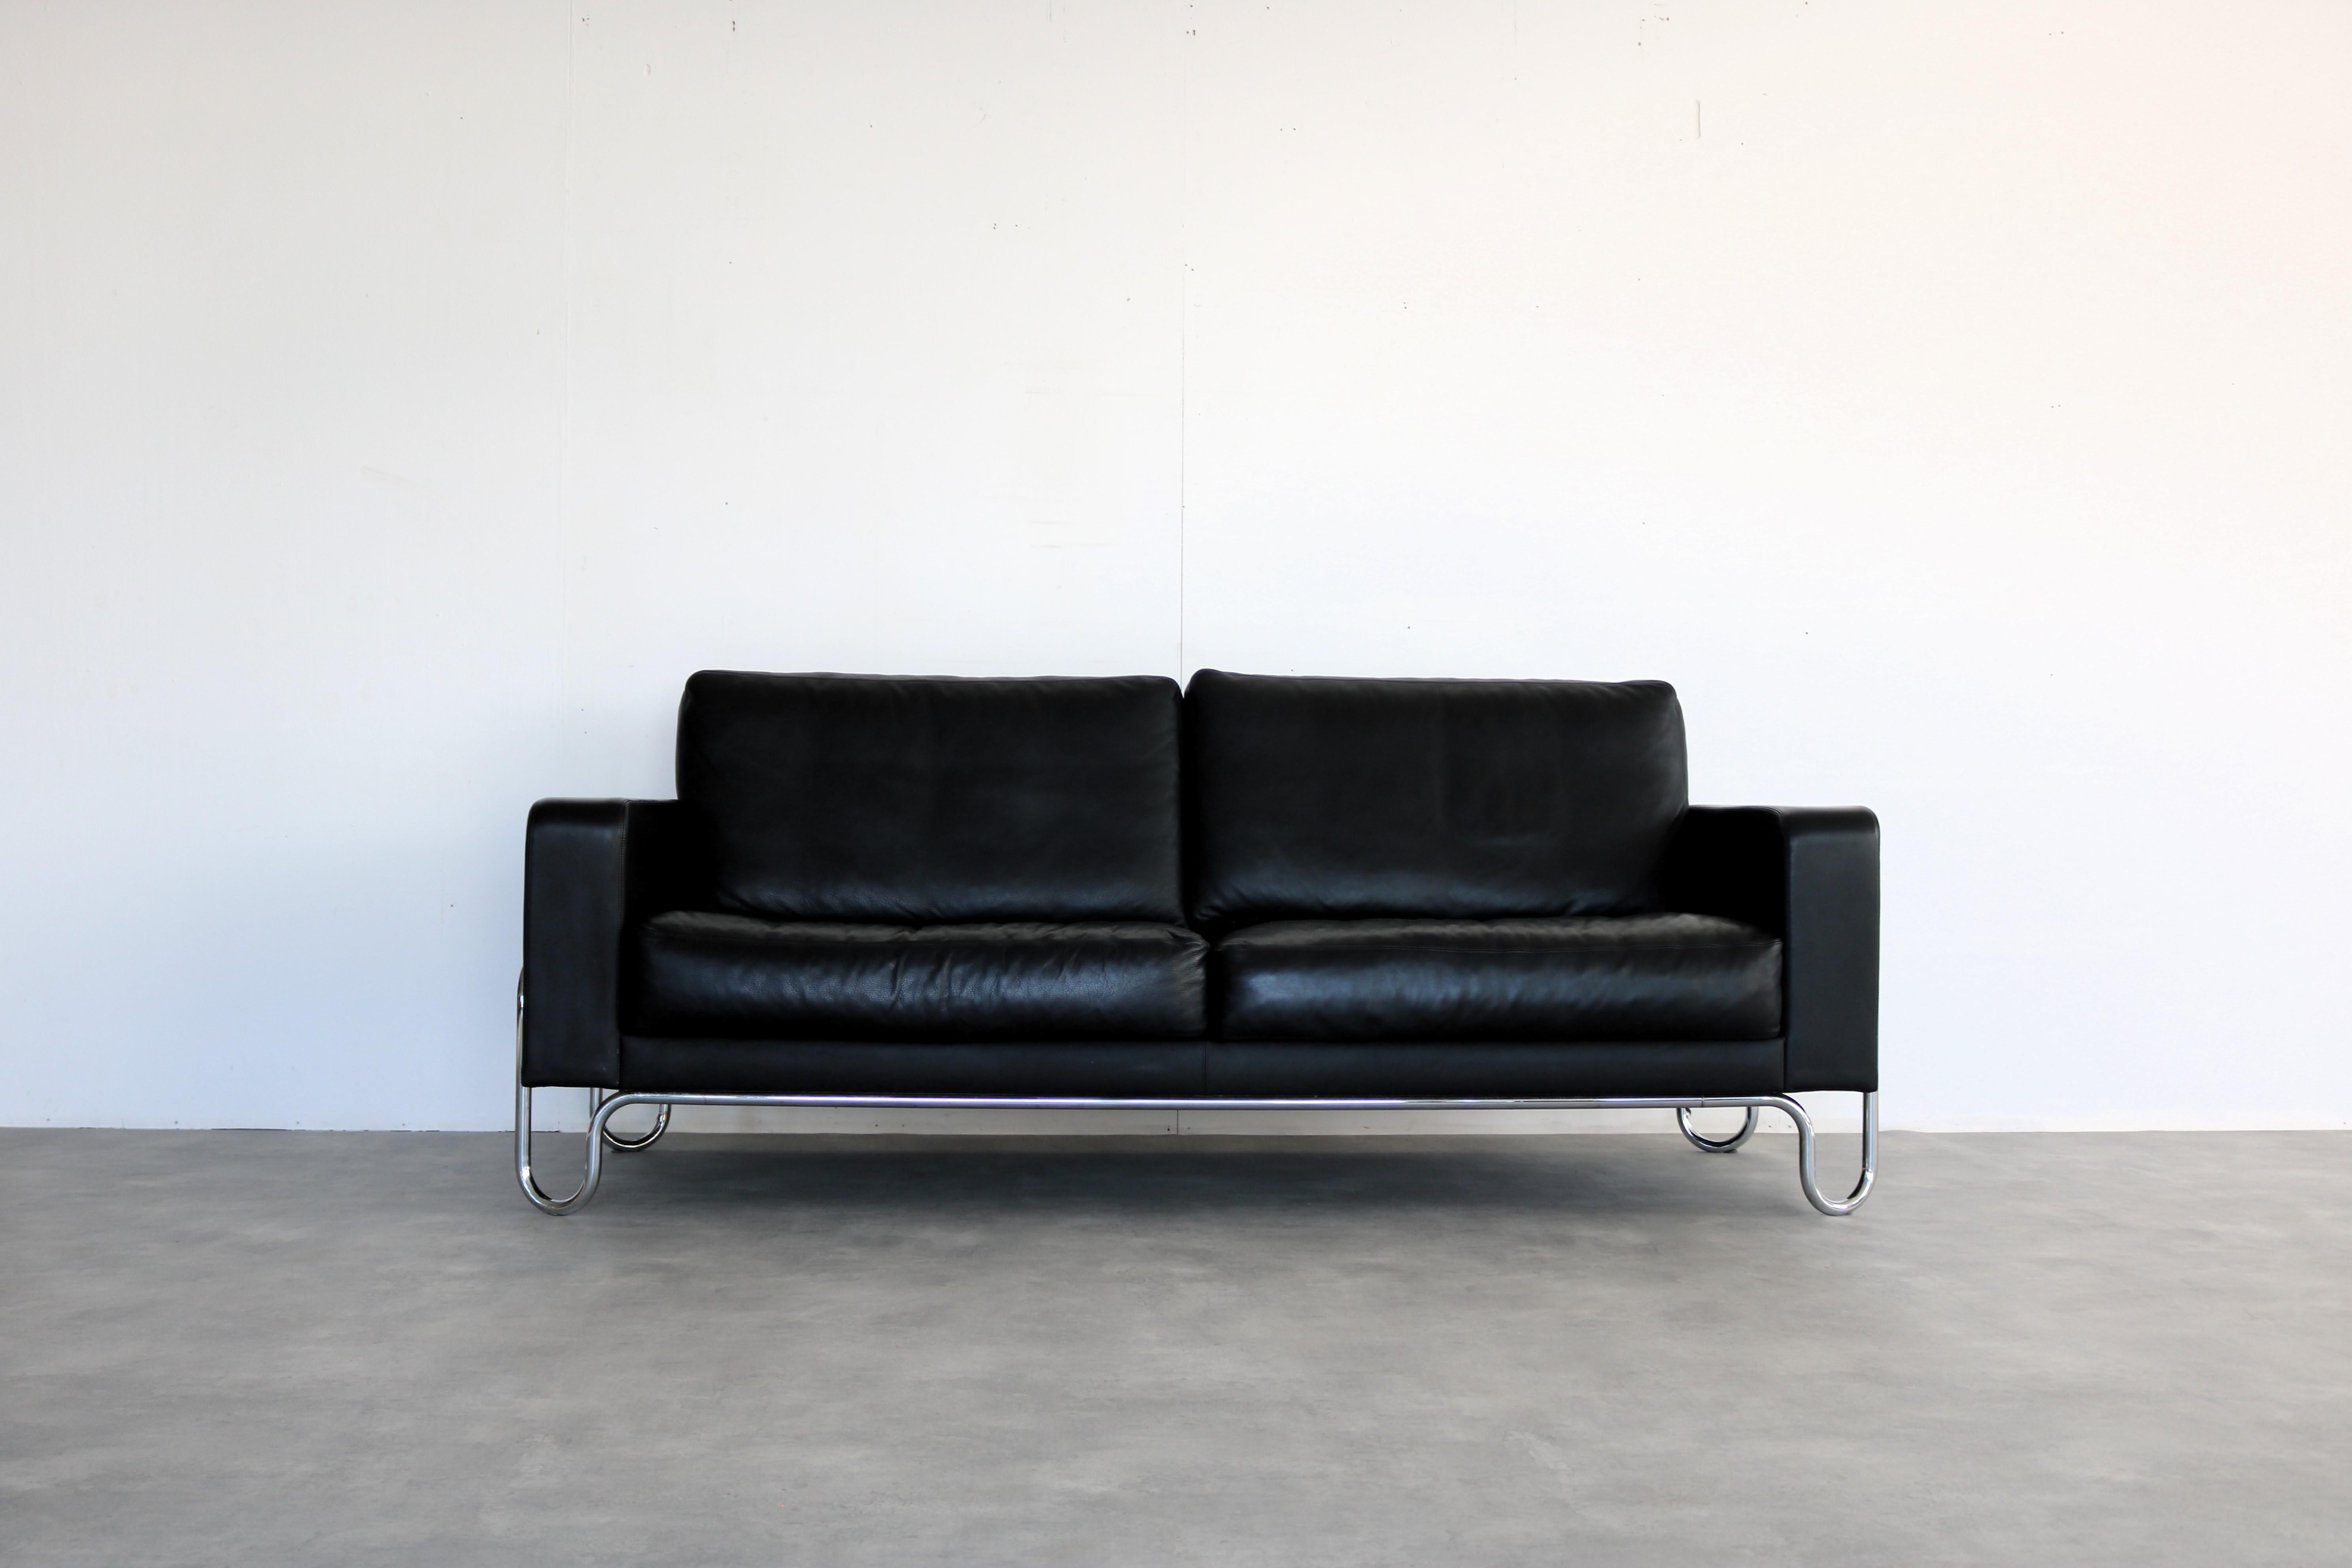 vintage sofa  design sofa  Gispen  AD-B3

design  W.H. Gispen  Dutch Originals  The Netherlands
condition  excellent  minimal signs of use
size  90 x 210 x 90 (hxwxd) seat height 46 cm;

details  leather; chrome; model AD-B3;

article number  2117